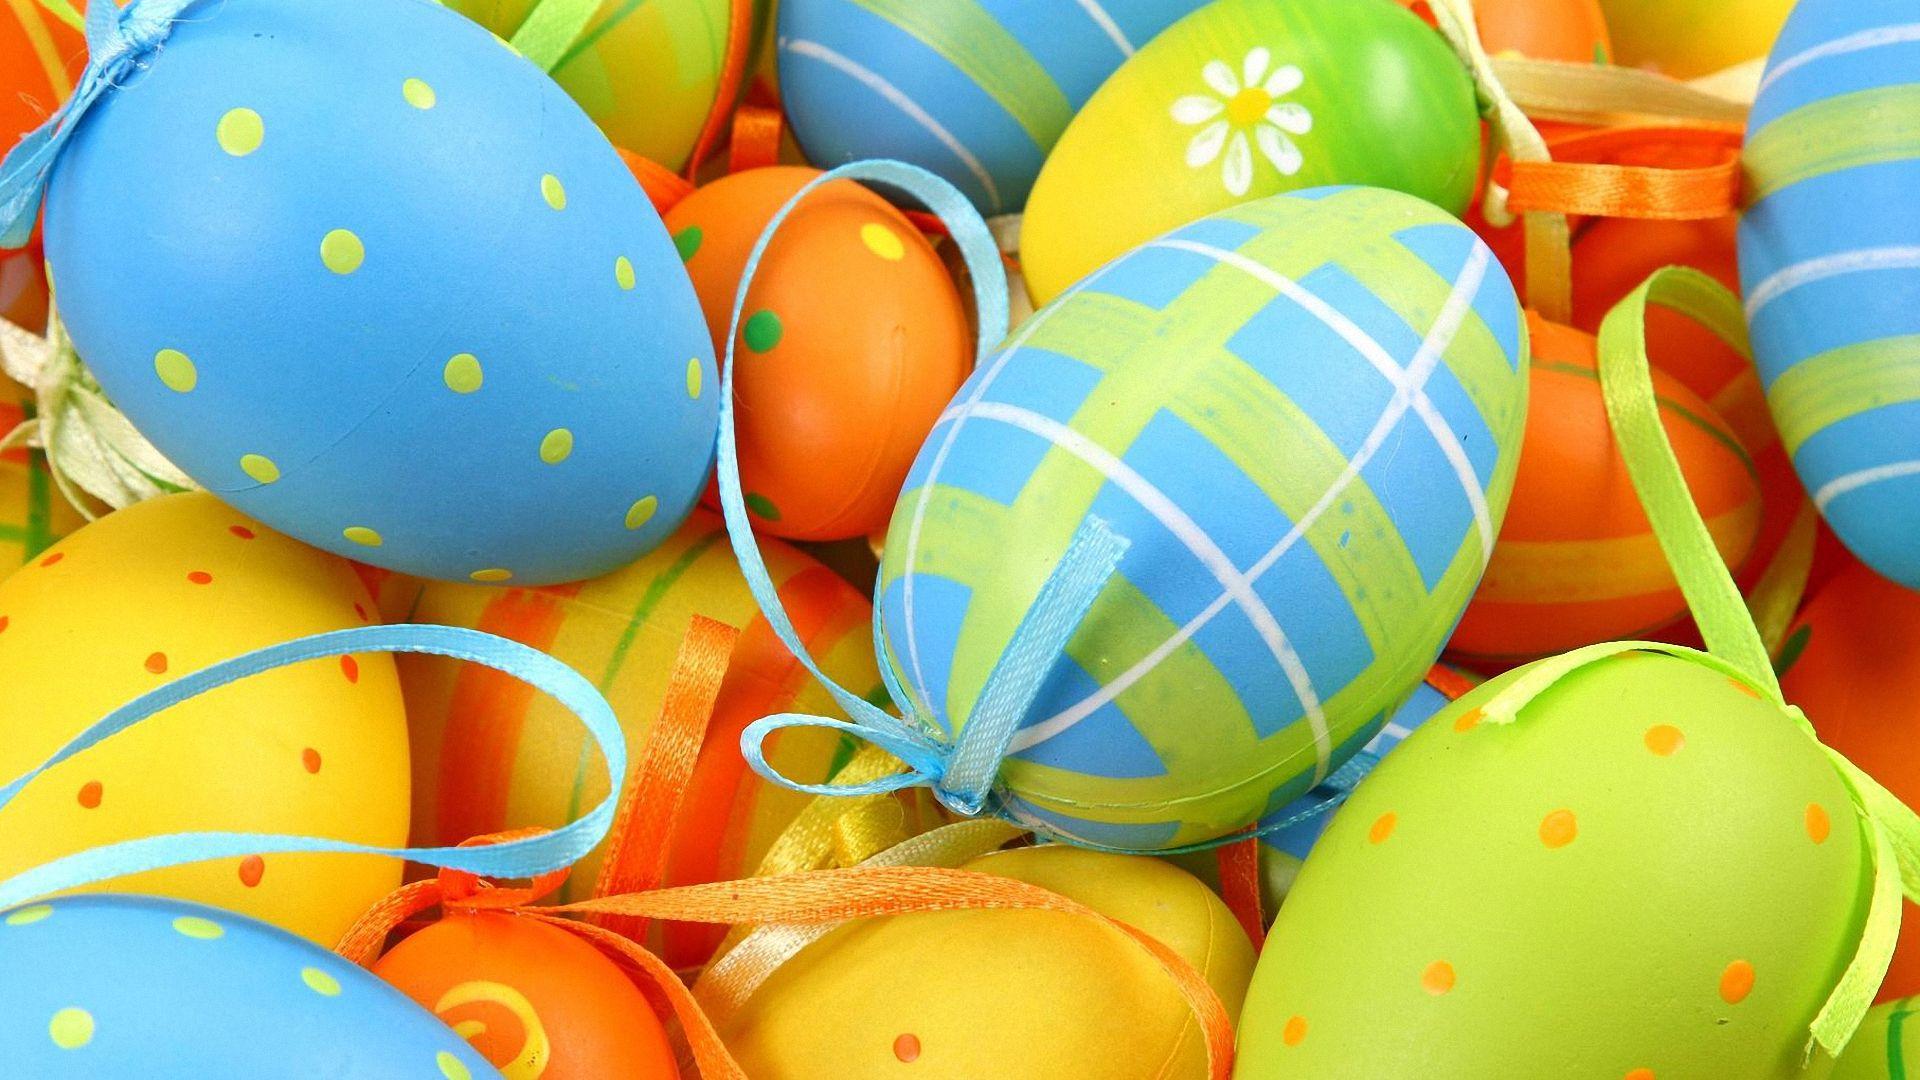 Free 1920x1080 Colorful Easter Eggs Wallpaper Full HD 1080p Background